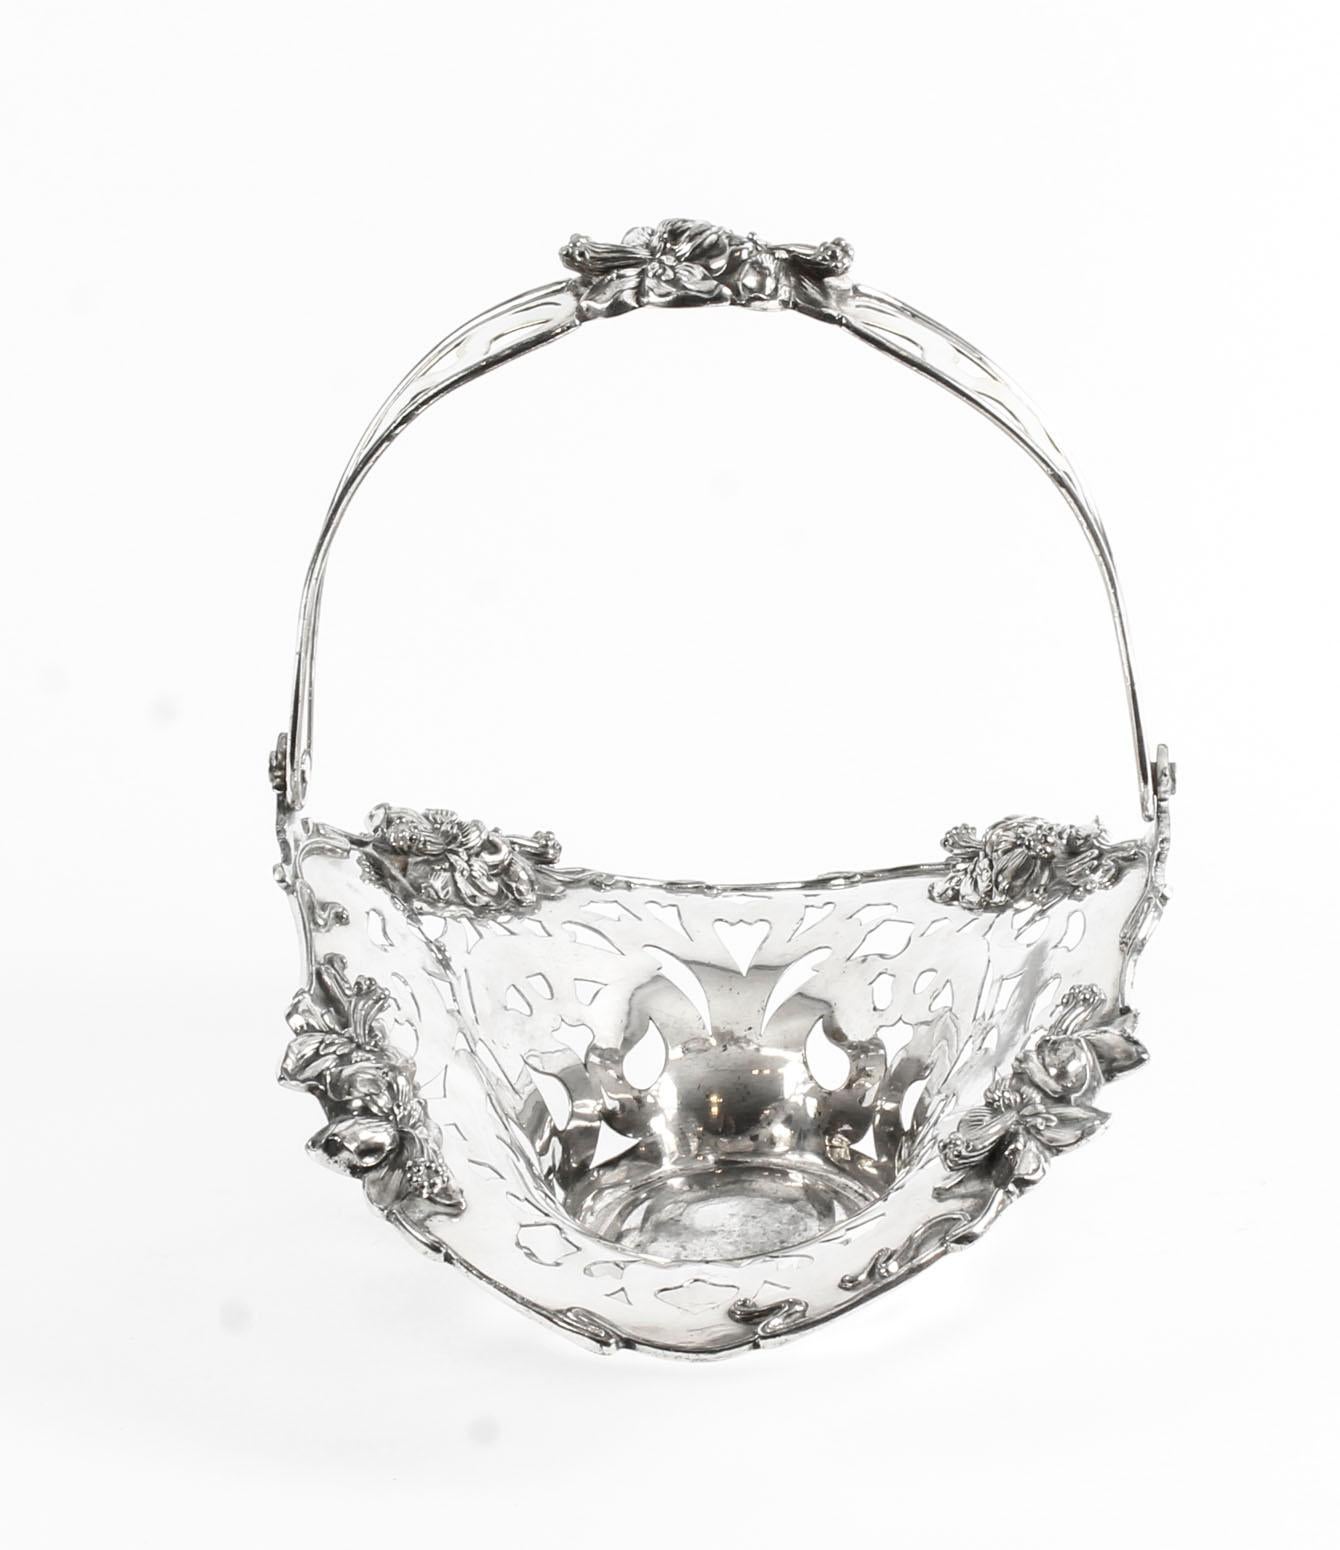 Early 20th Century Antique American Silver Plated Fruit Basket The Meriden Silver Plate Co. 1904